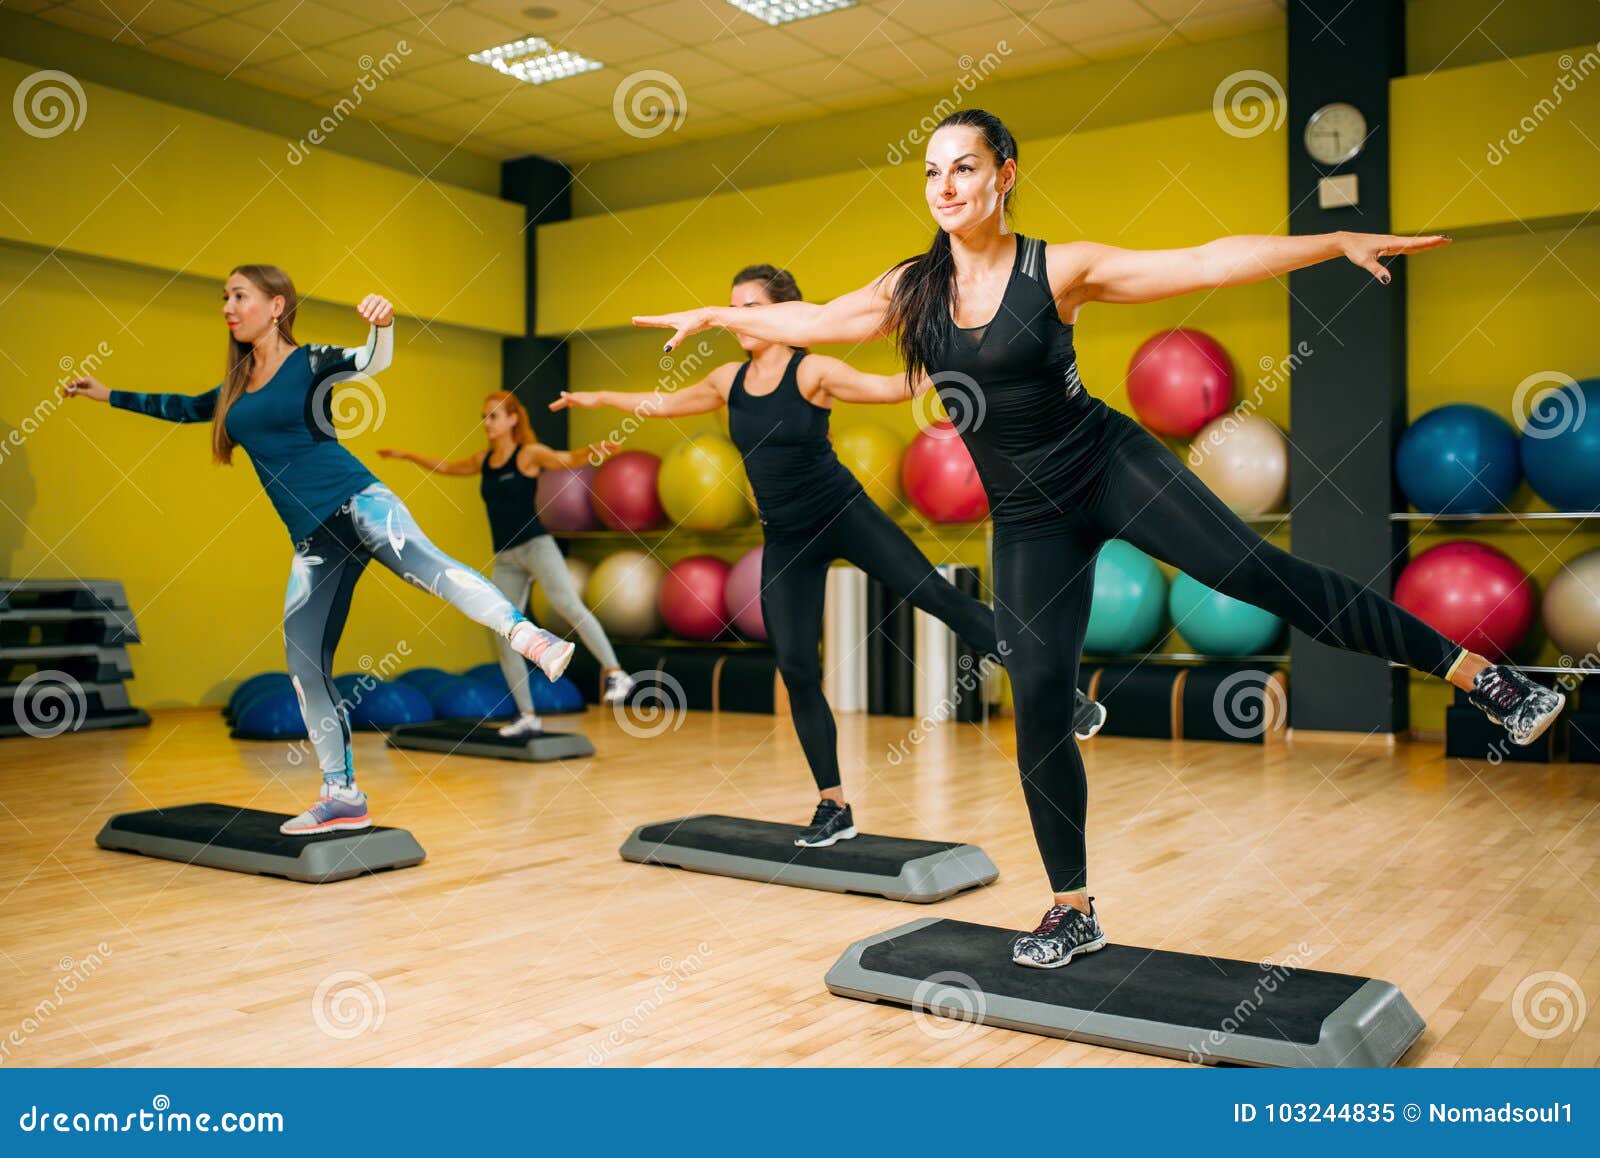 https://thumbs.dreamstime.com/z/women-group-step-aerobic-training-female-sport-teamwork-gym-fit-class-fitness-exercise-motion-women-group-step-aerobic-103244835.jpg